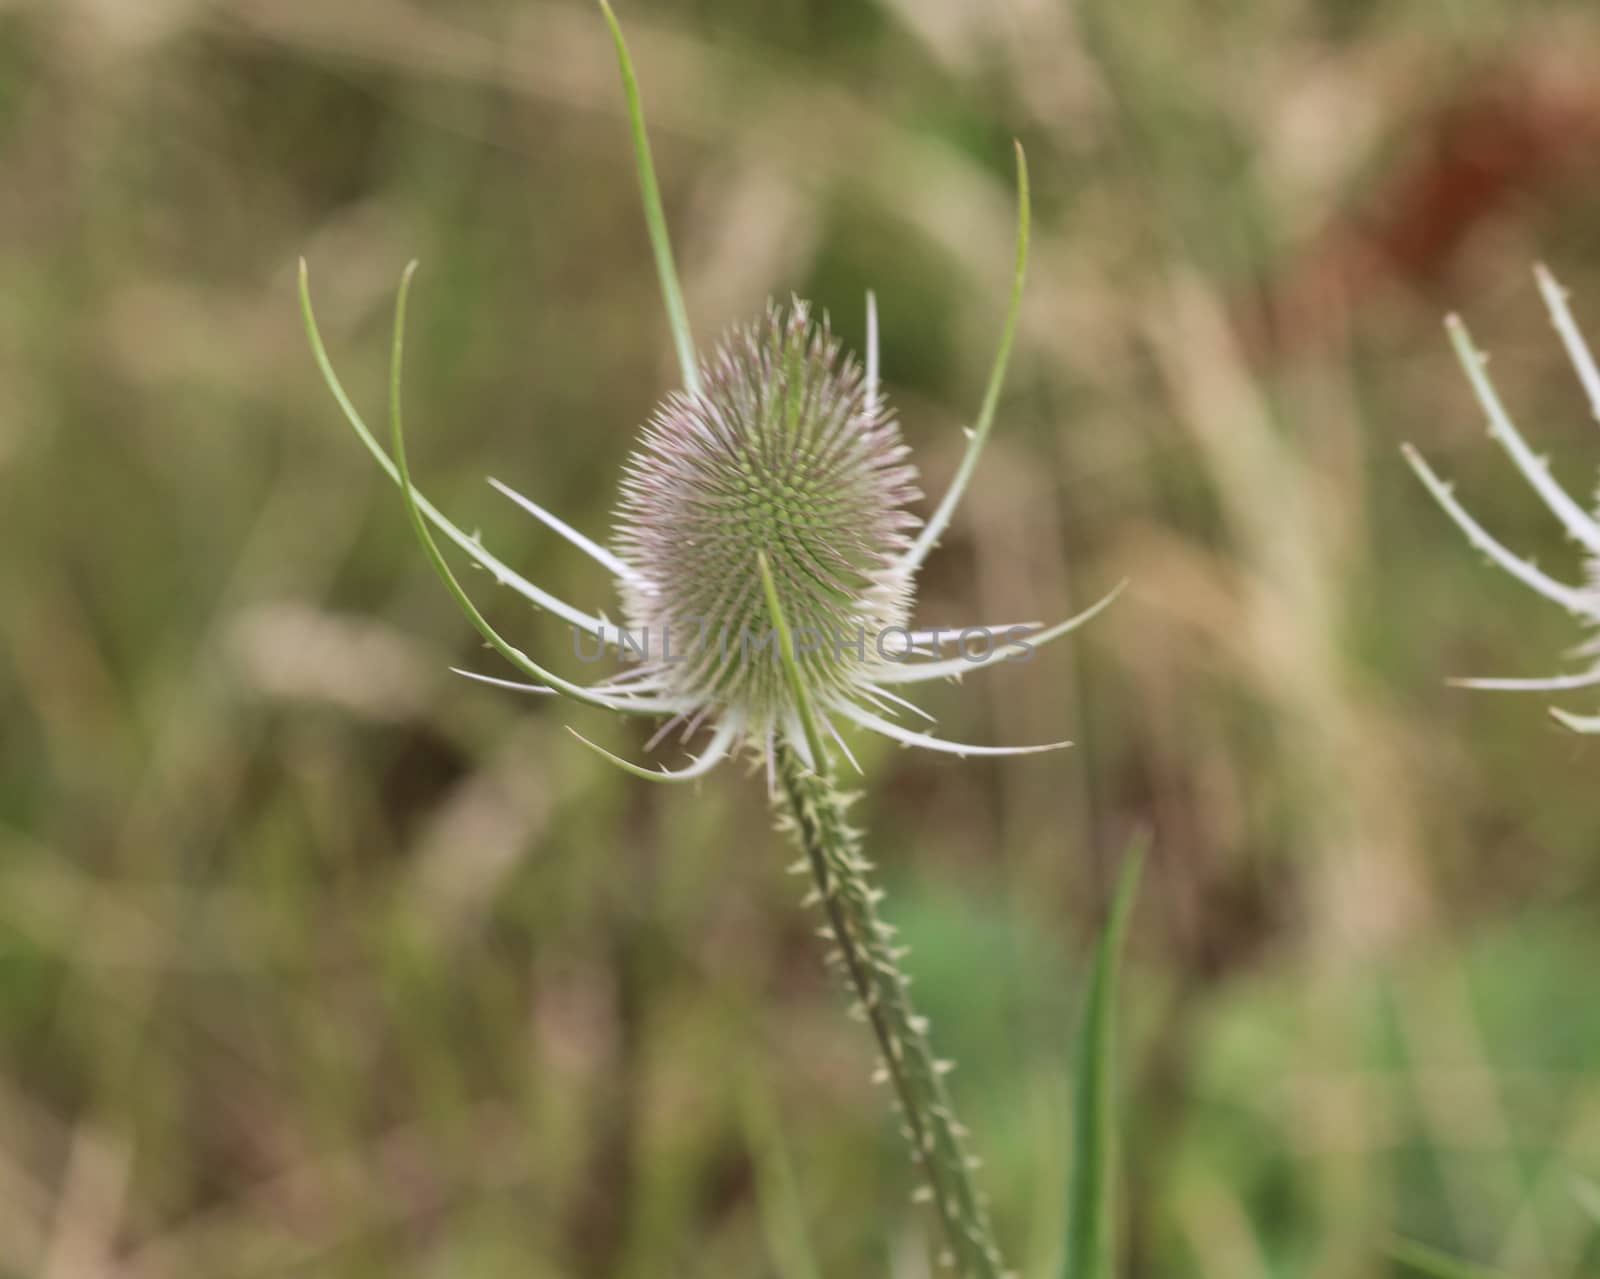 Close up of wild teasel or or fullers teasel (Dipsacus fullonum)